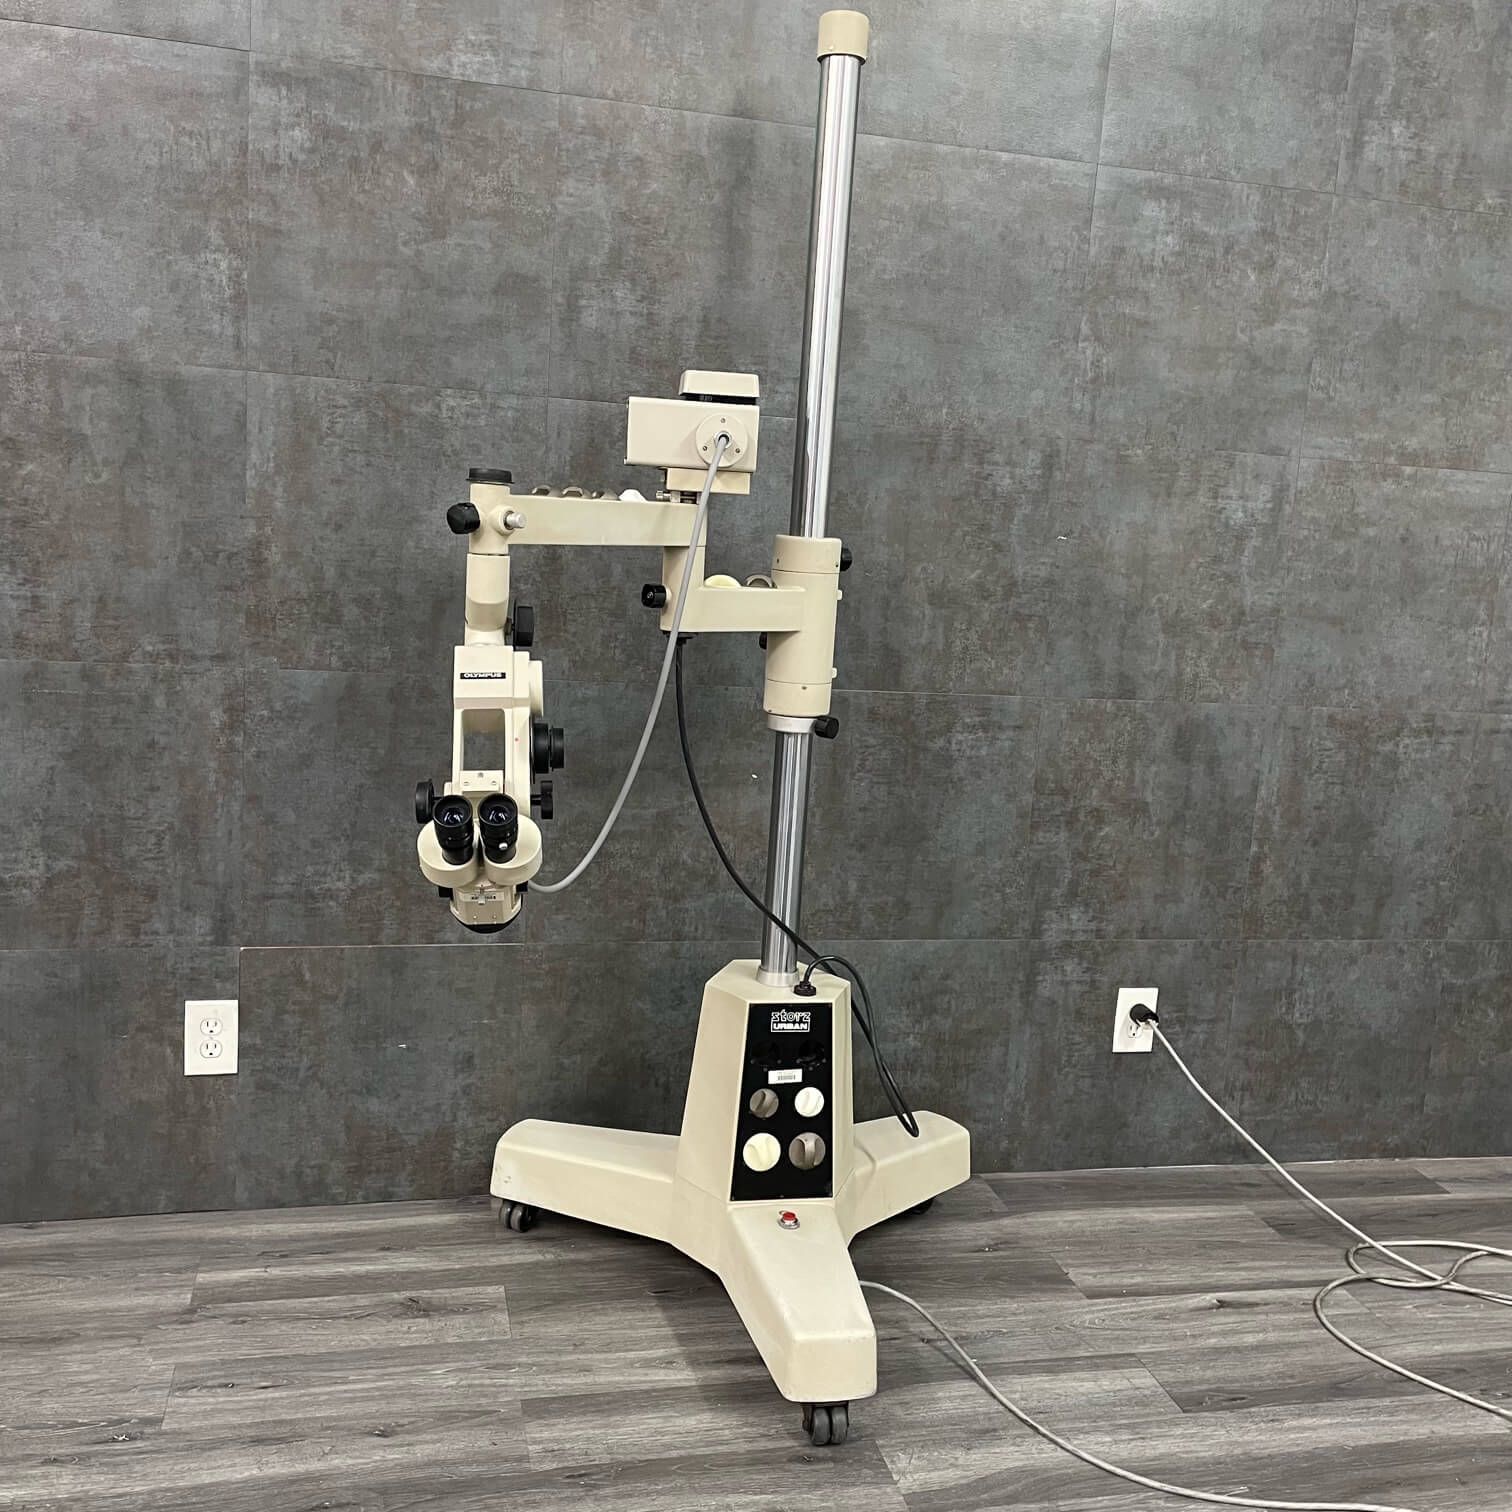 Storz Urban Surgical Microscope